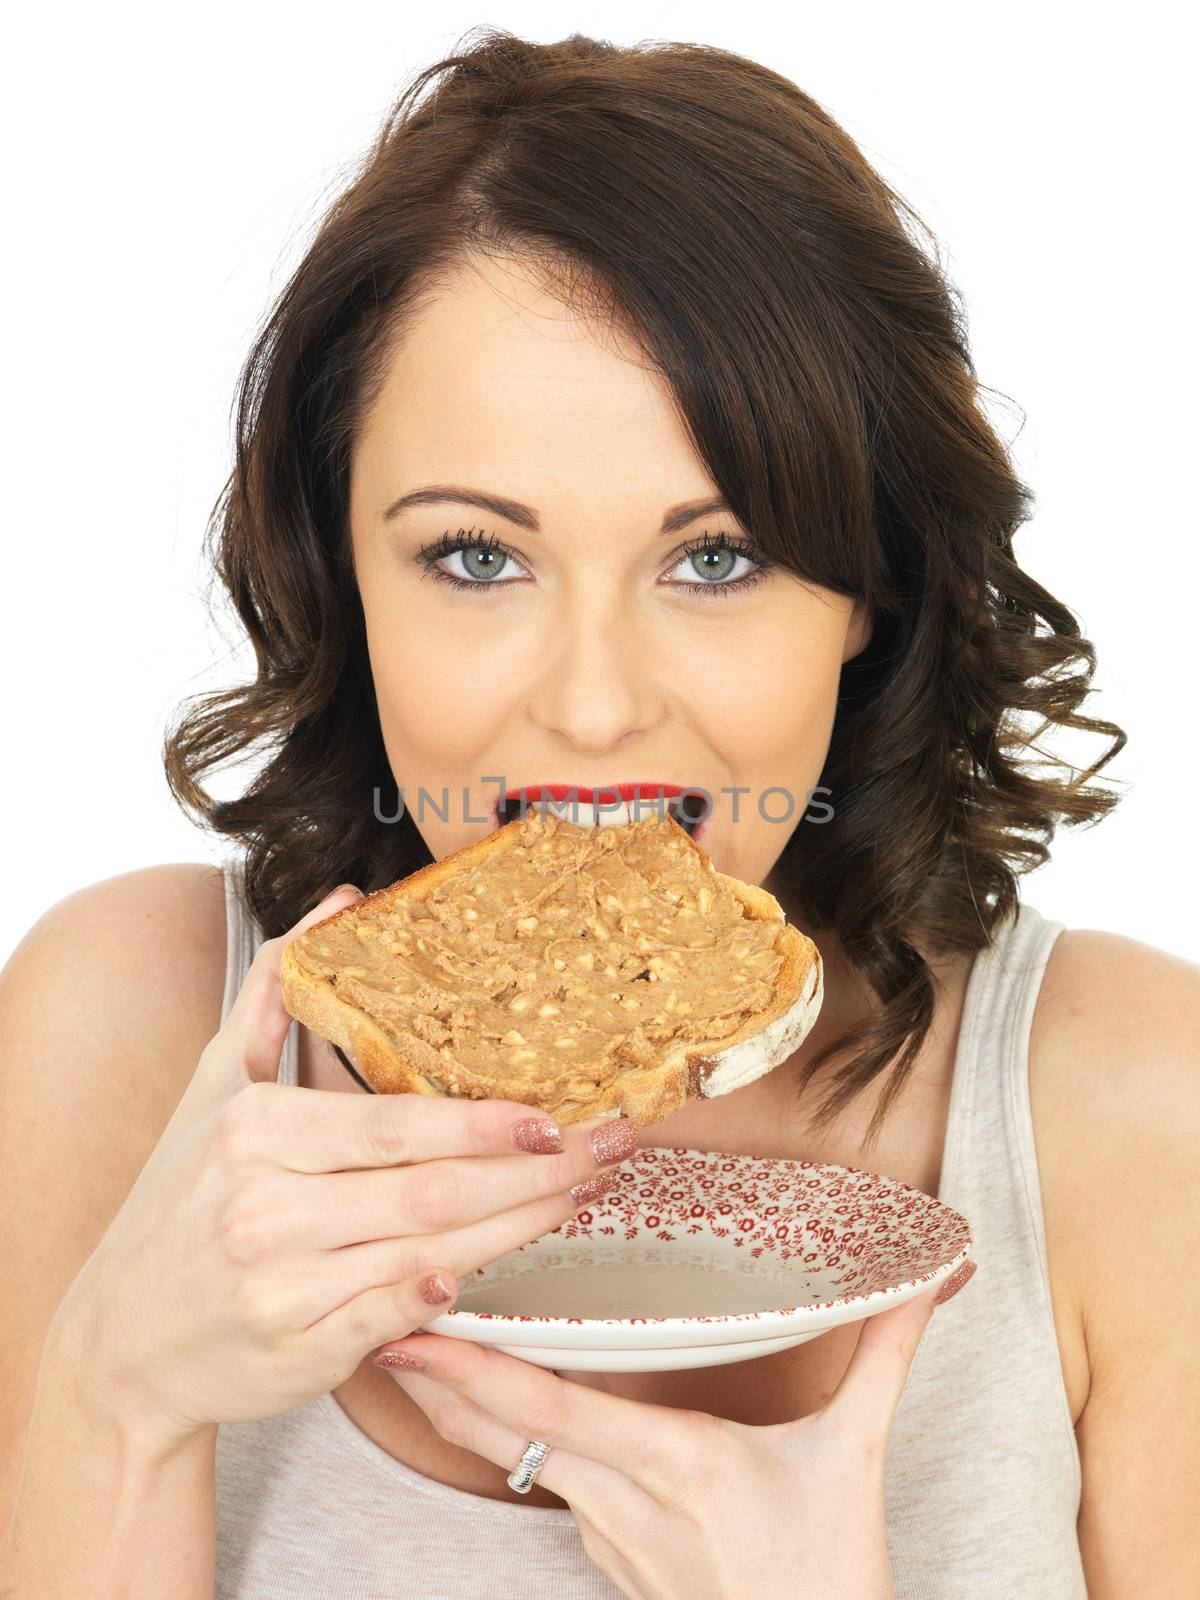 Young Woman Holding Toast with Crunchy Peanut Butter by Whiteboxmedia